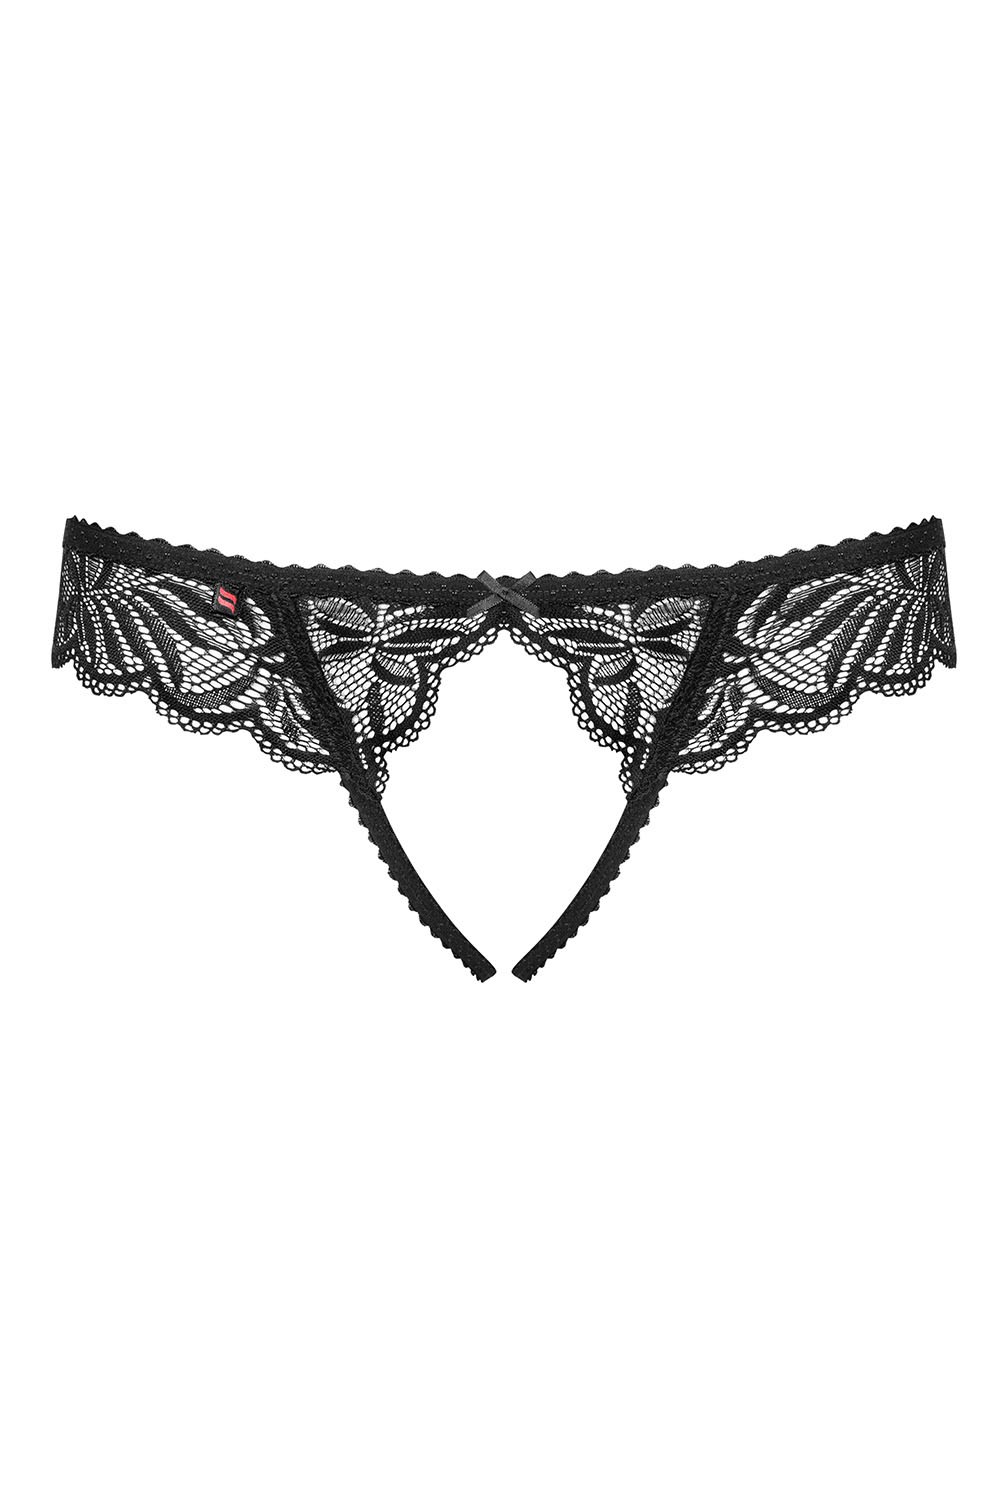 Tanga Obsessive Contica crotchles thong